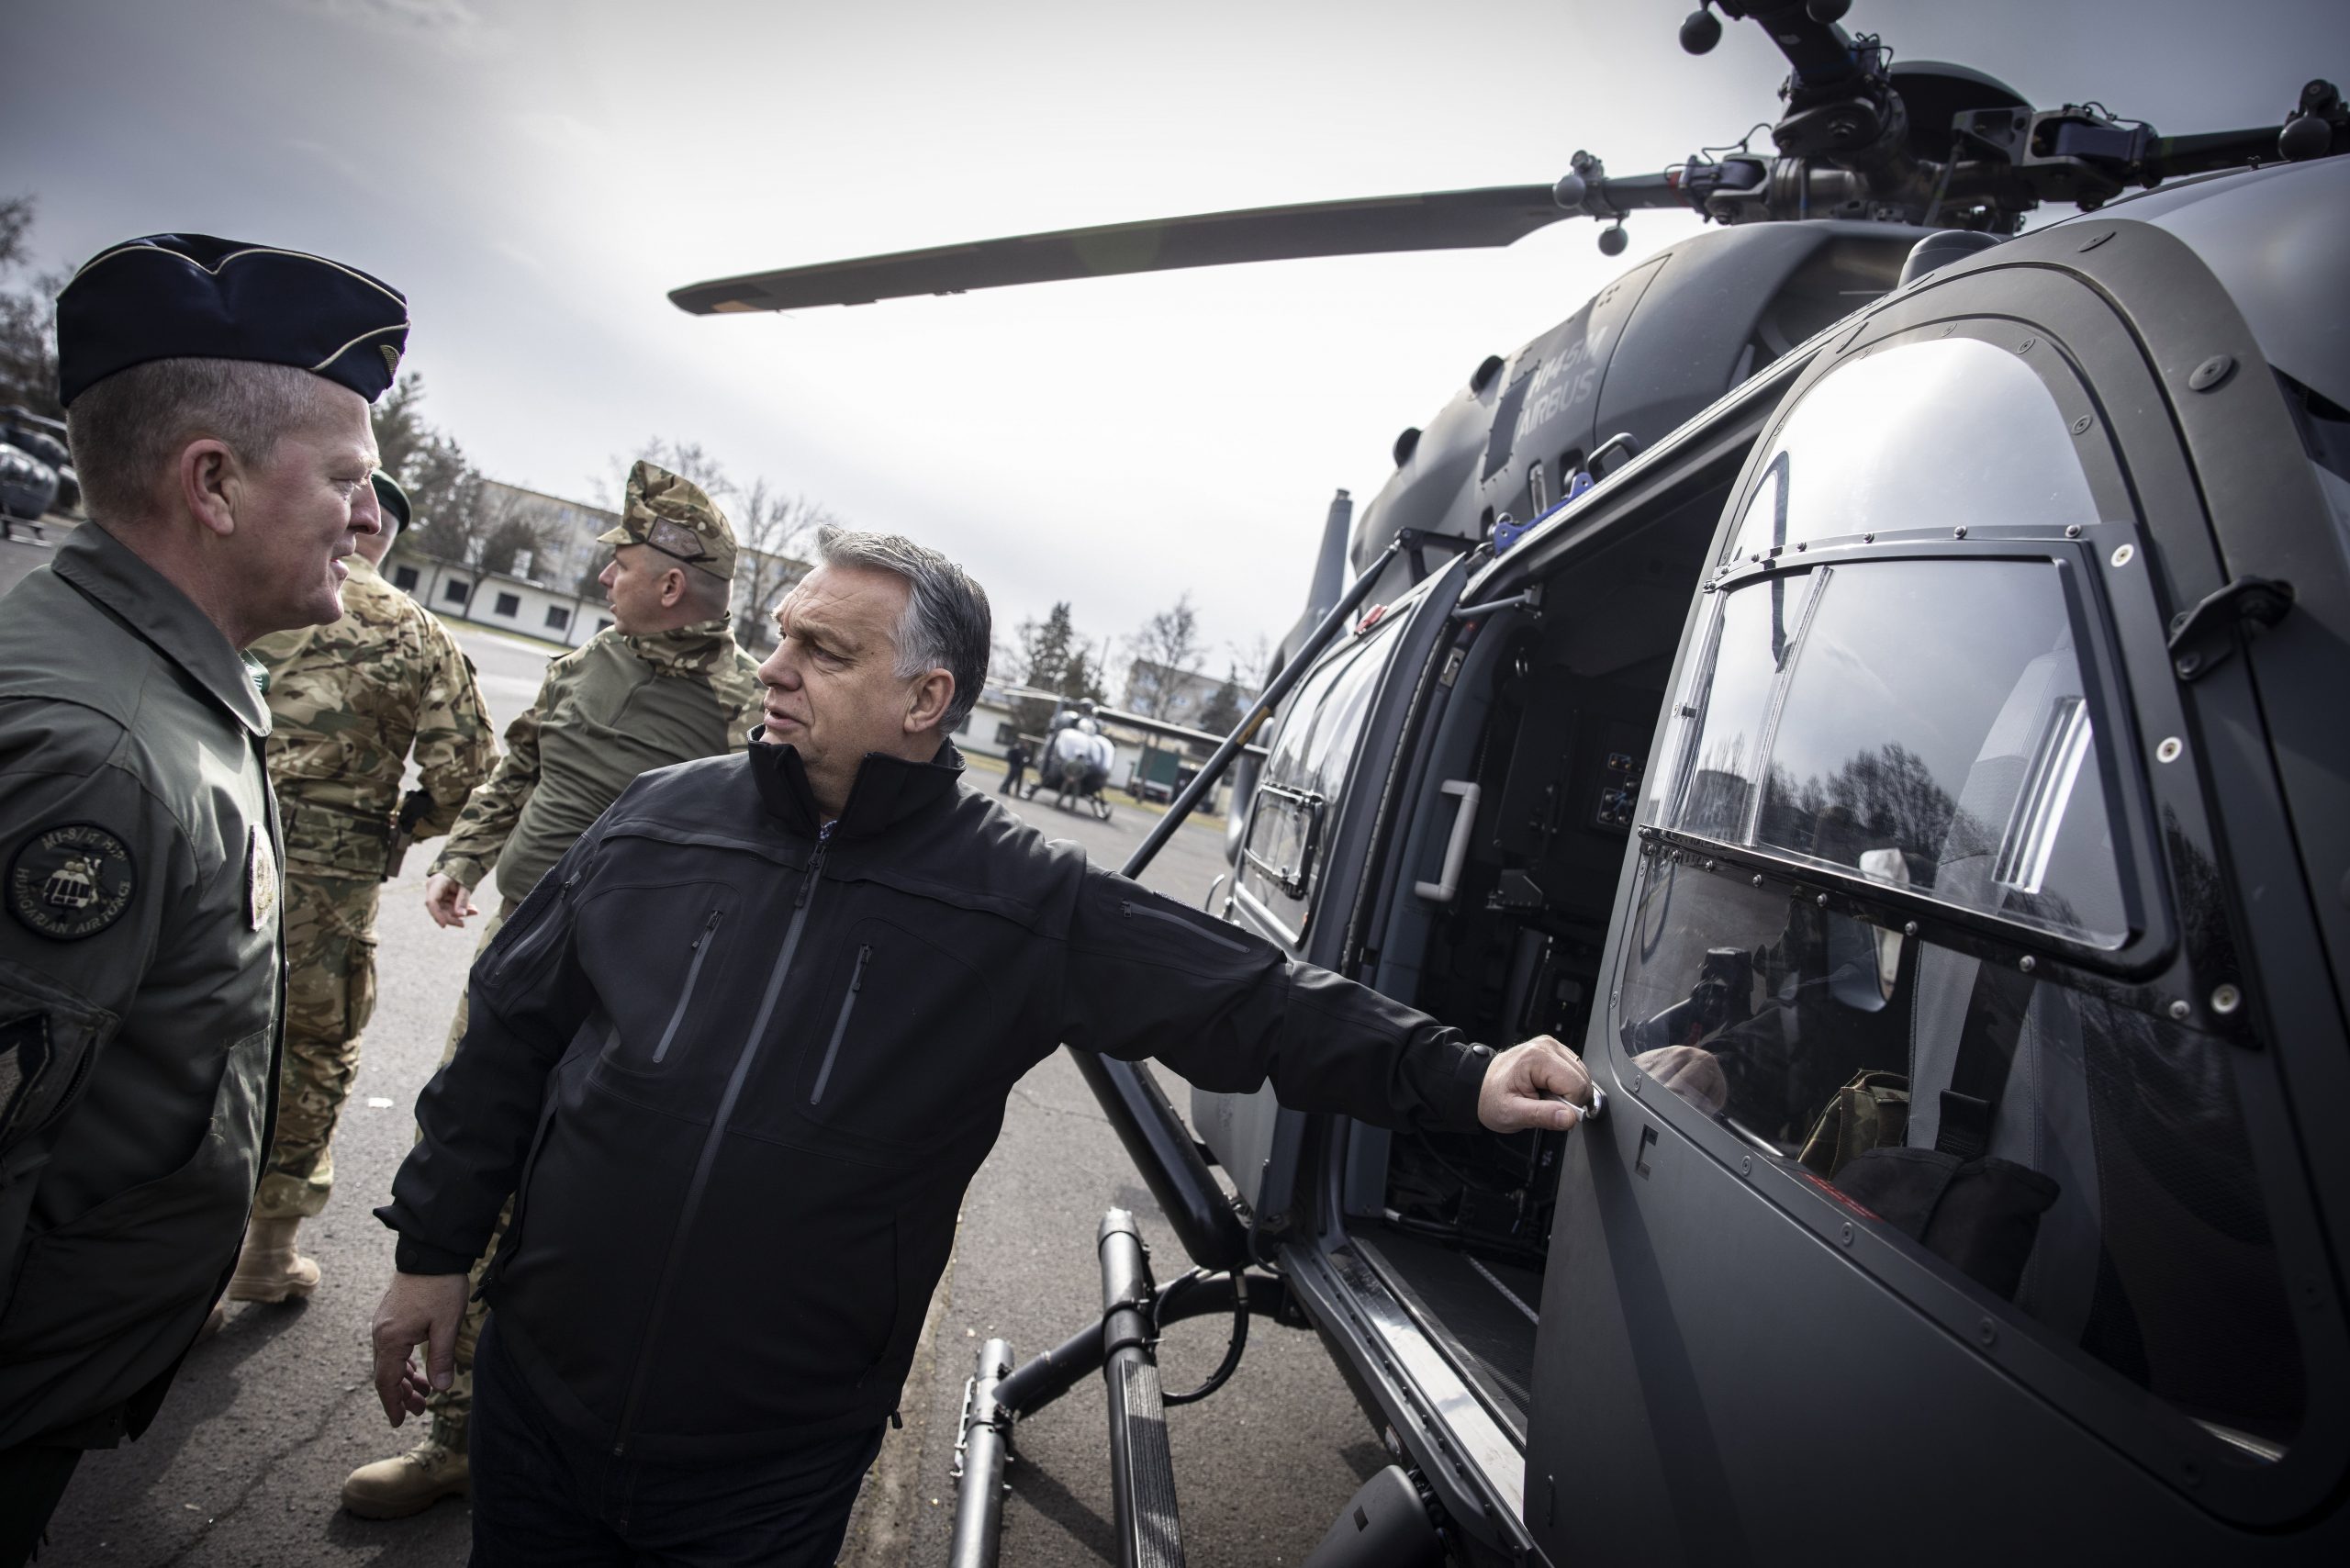 PM Orbán: Hungary Will Not Send Weapons to Ukraine